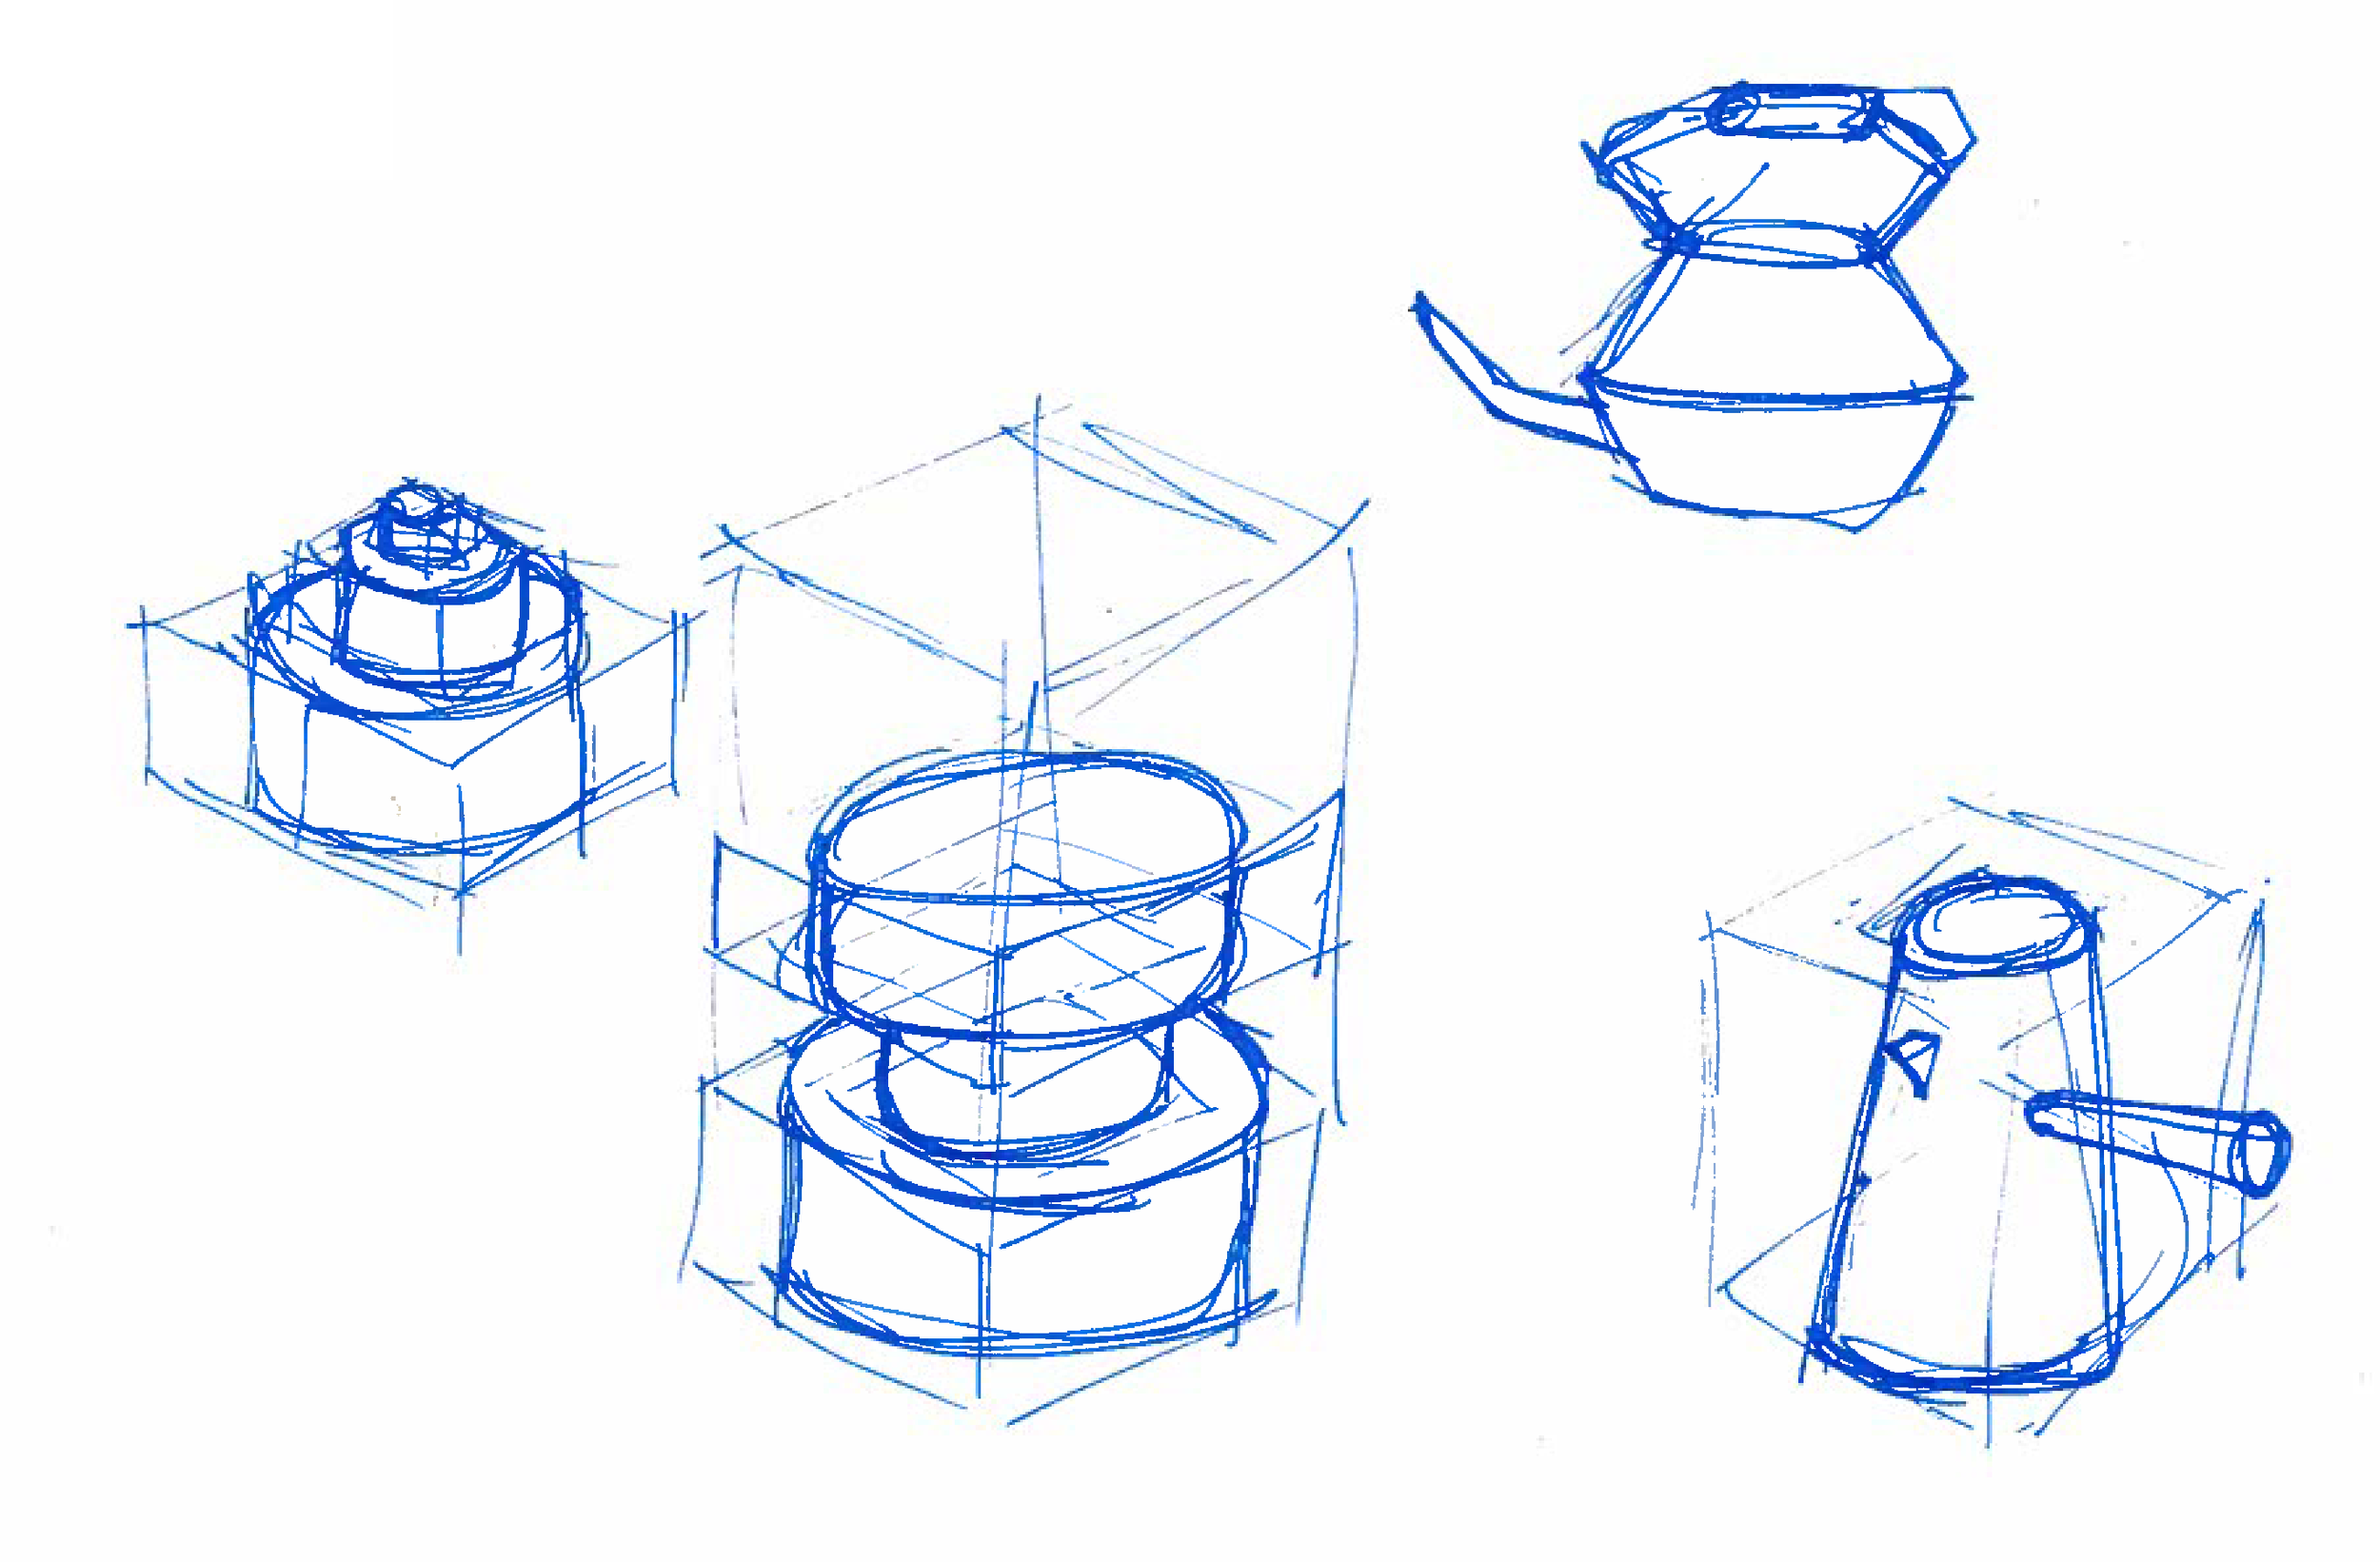 Initial concept sketches.